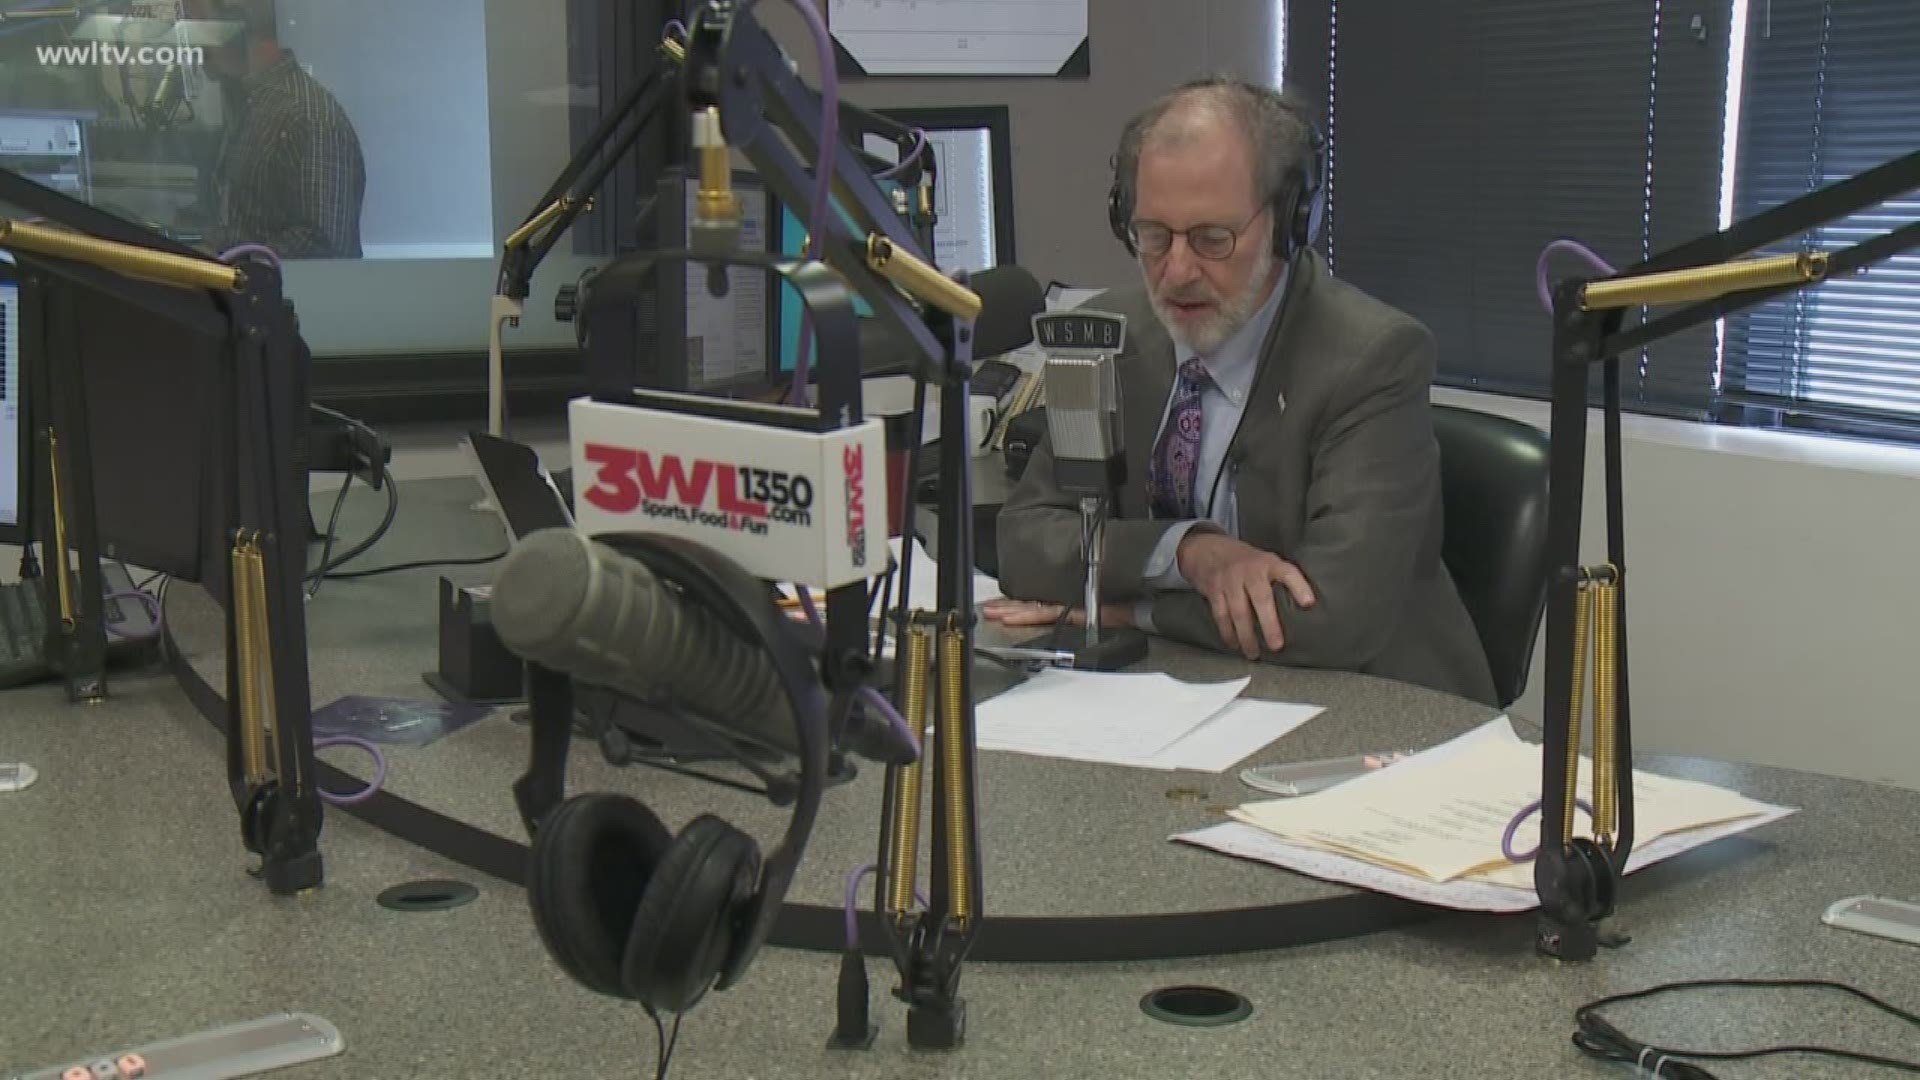 Tom Fitzmorris' "The Food Show" marked 30 years on the air Wednesday on WWL Radio.